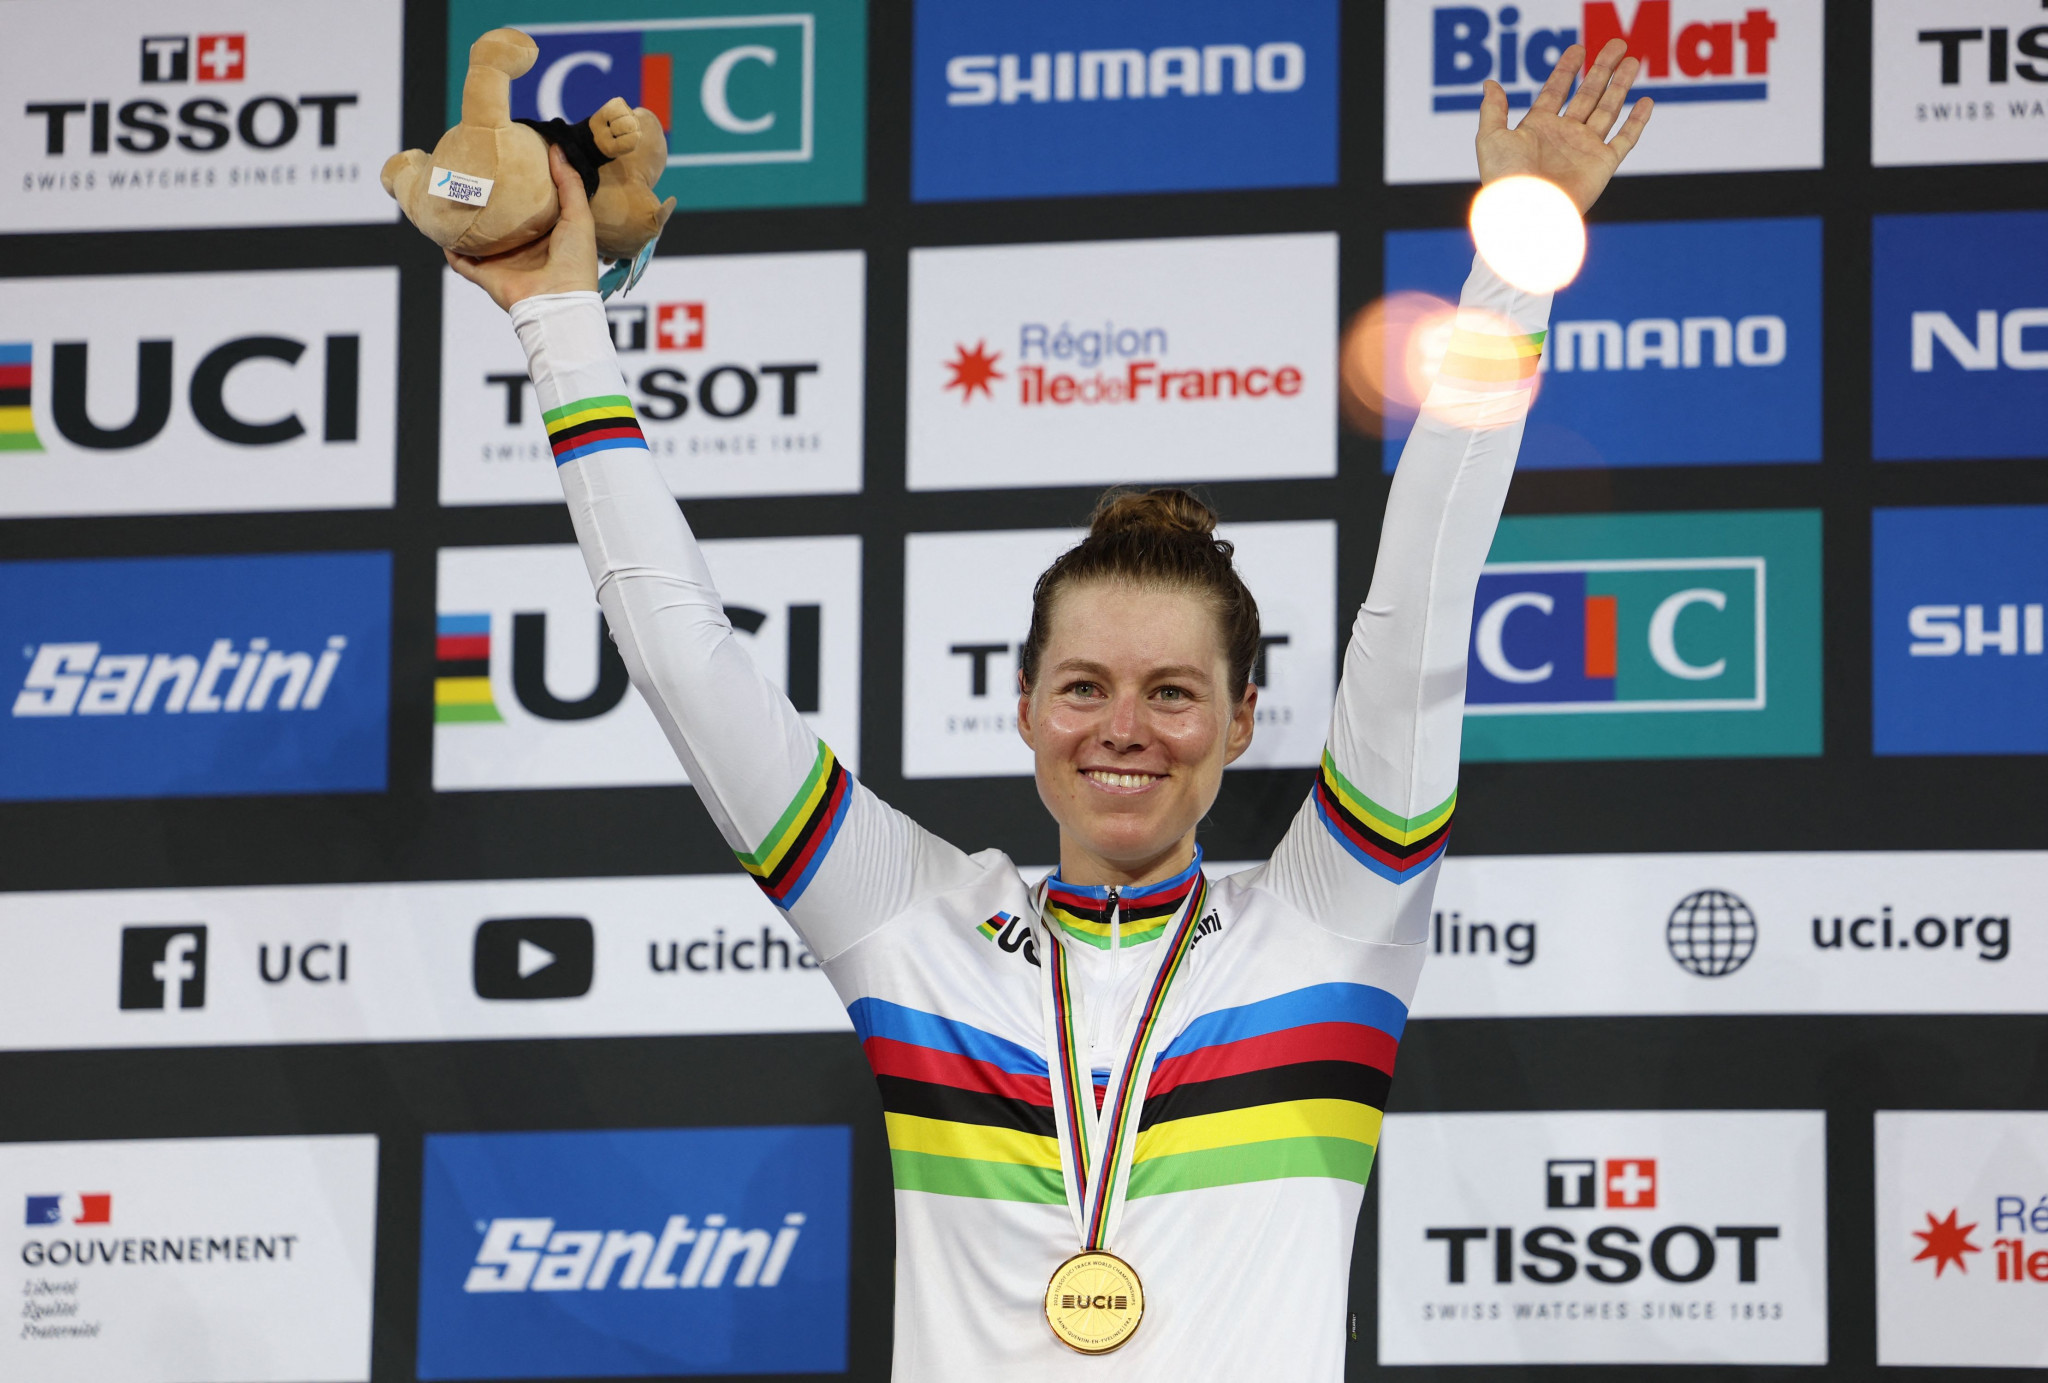 Valente pips Archibald for women's endurance title at Grand Finale of UCI Track Champions League